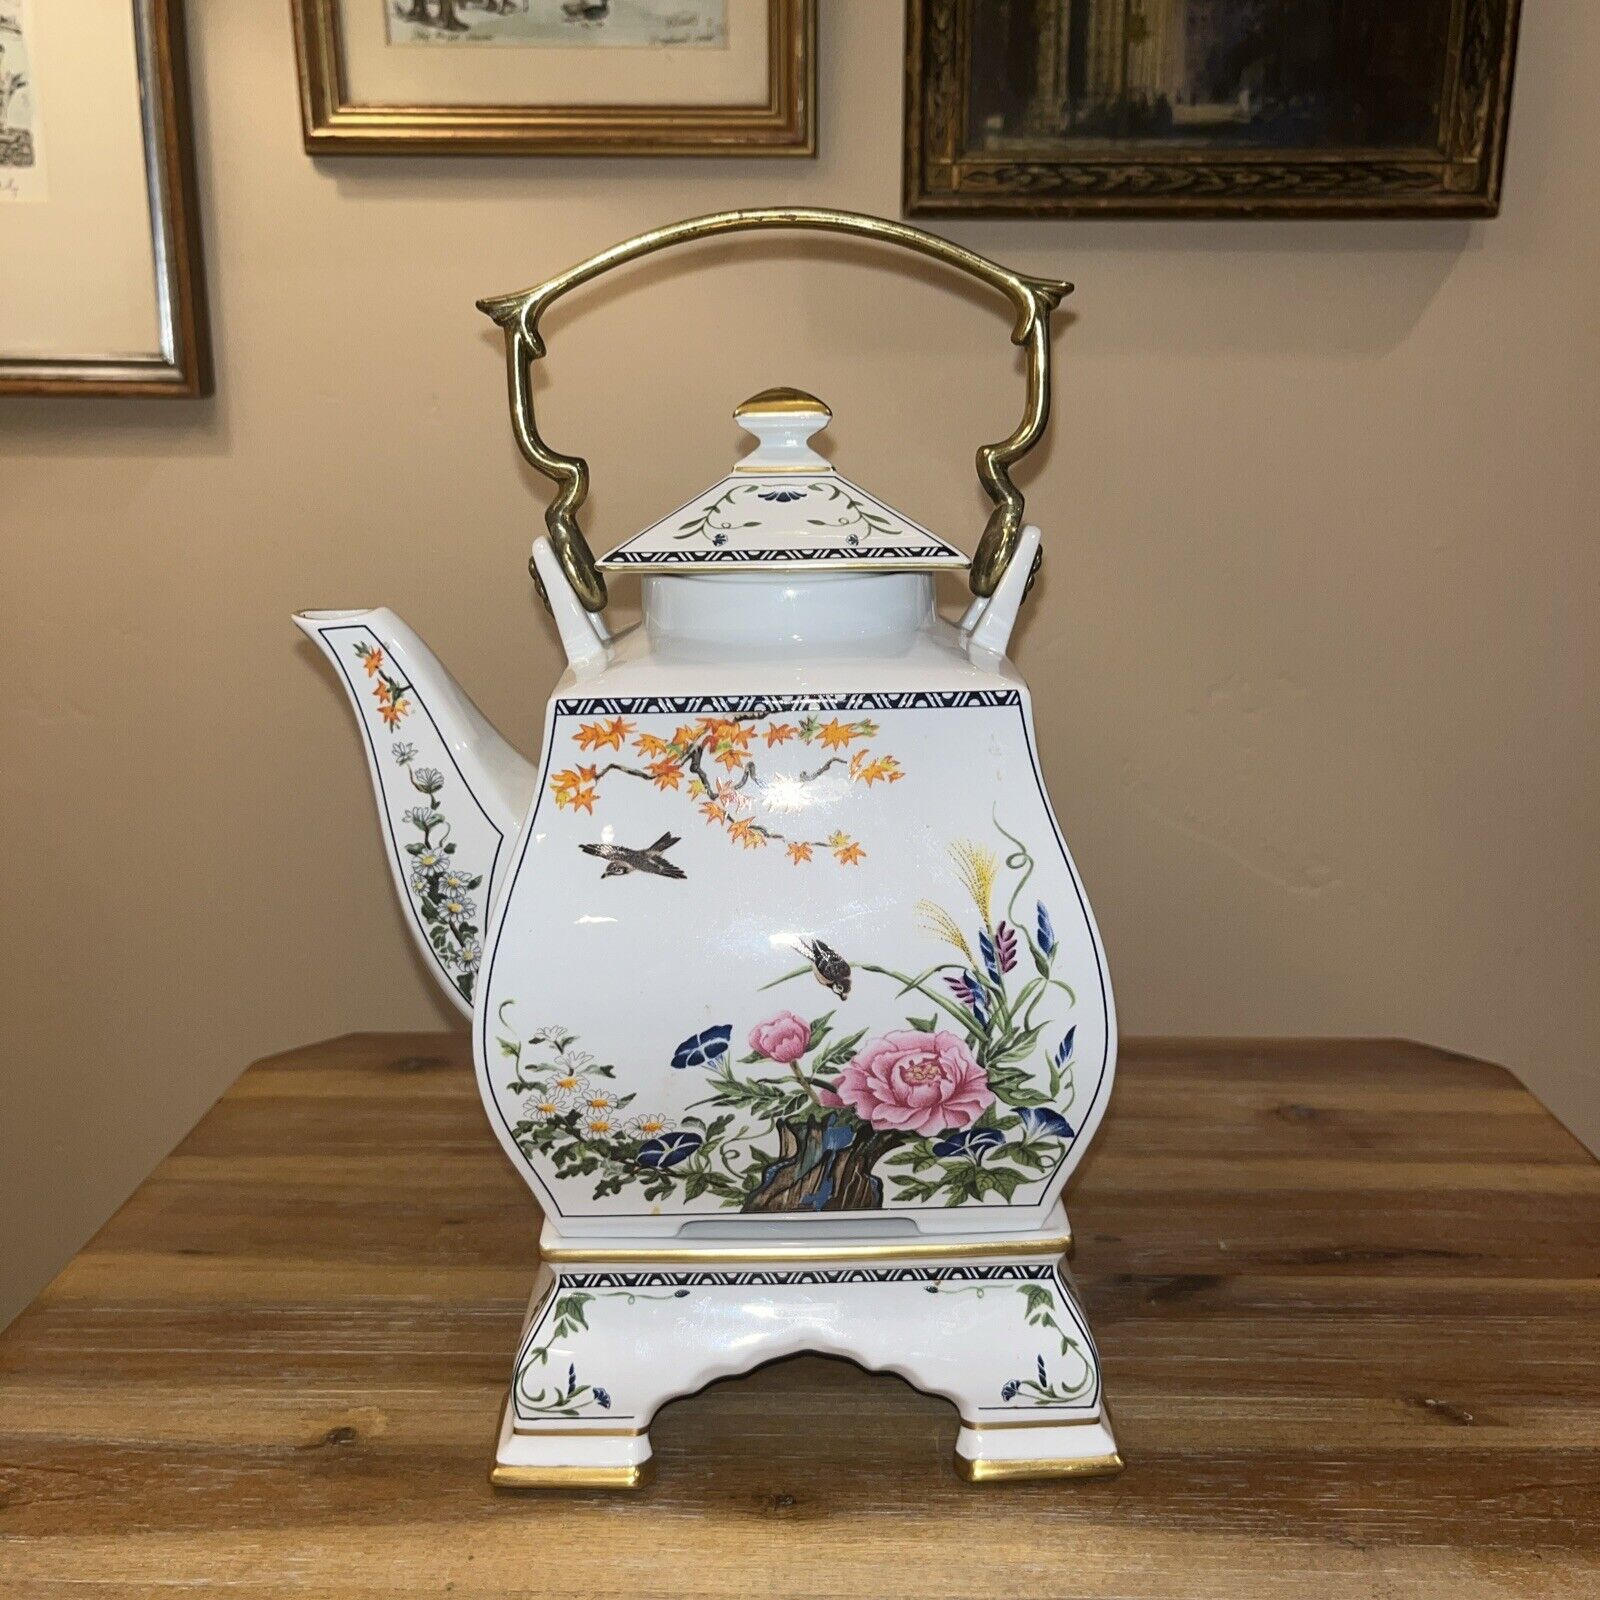 Franklin Mint Birds and Flowers of the Orient Teapot with Ceramic Stand